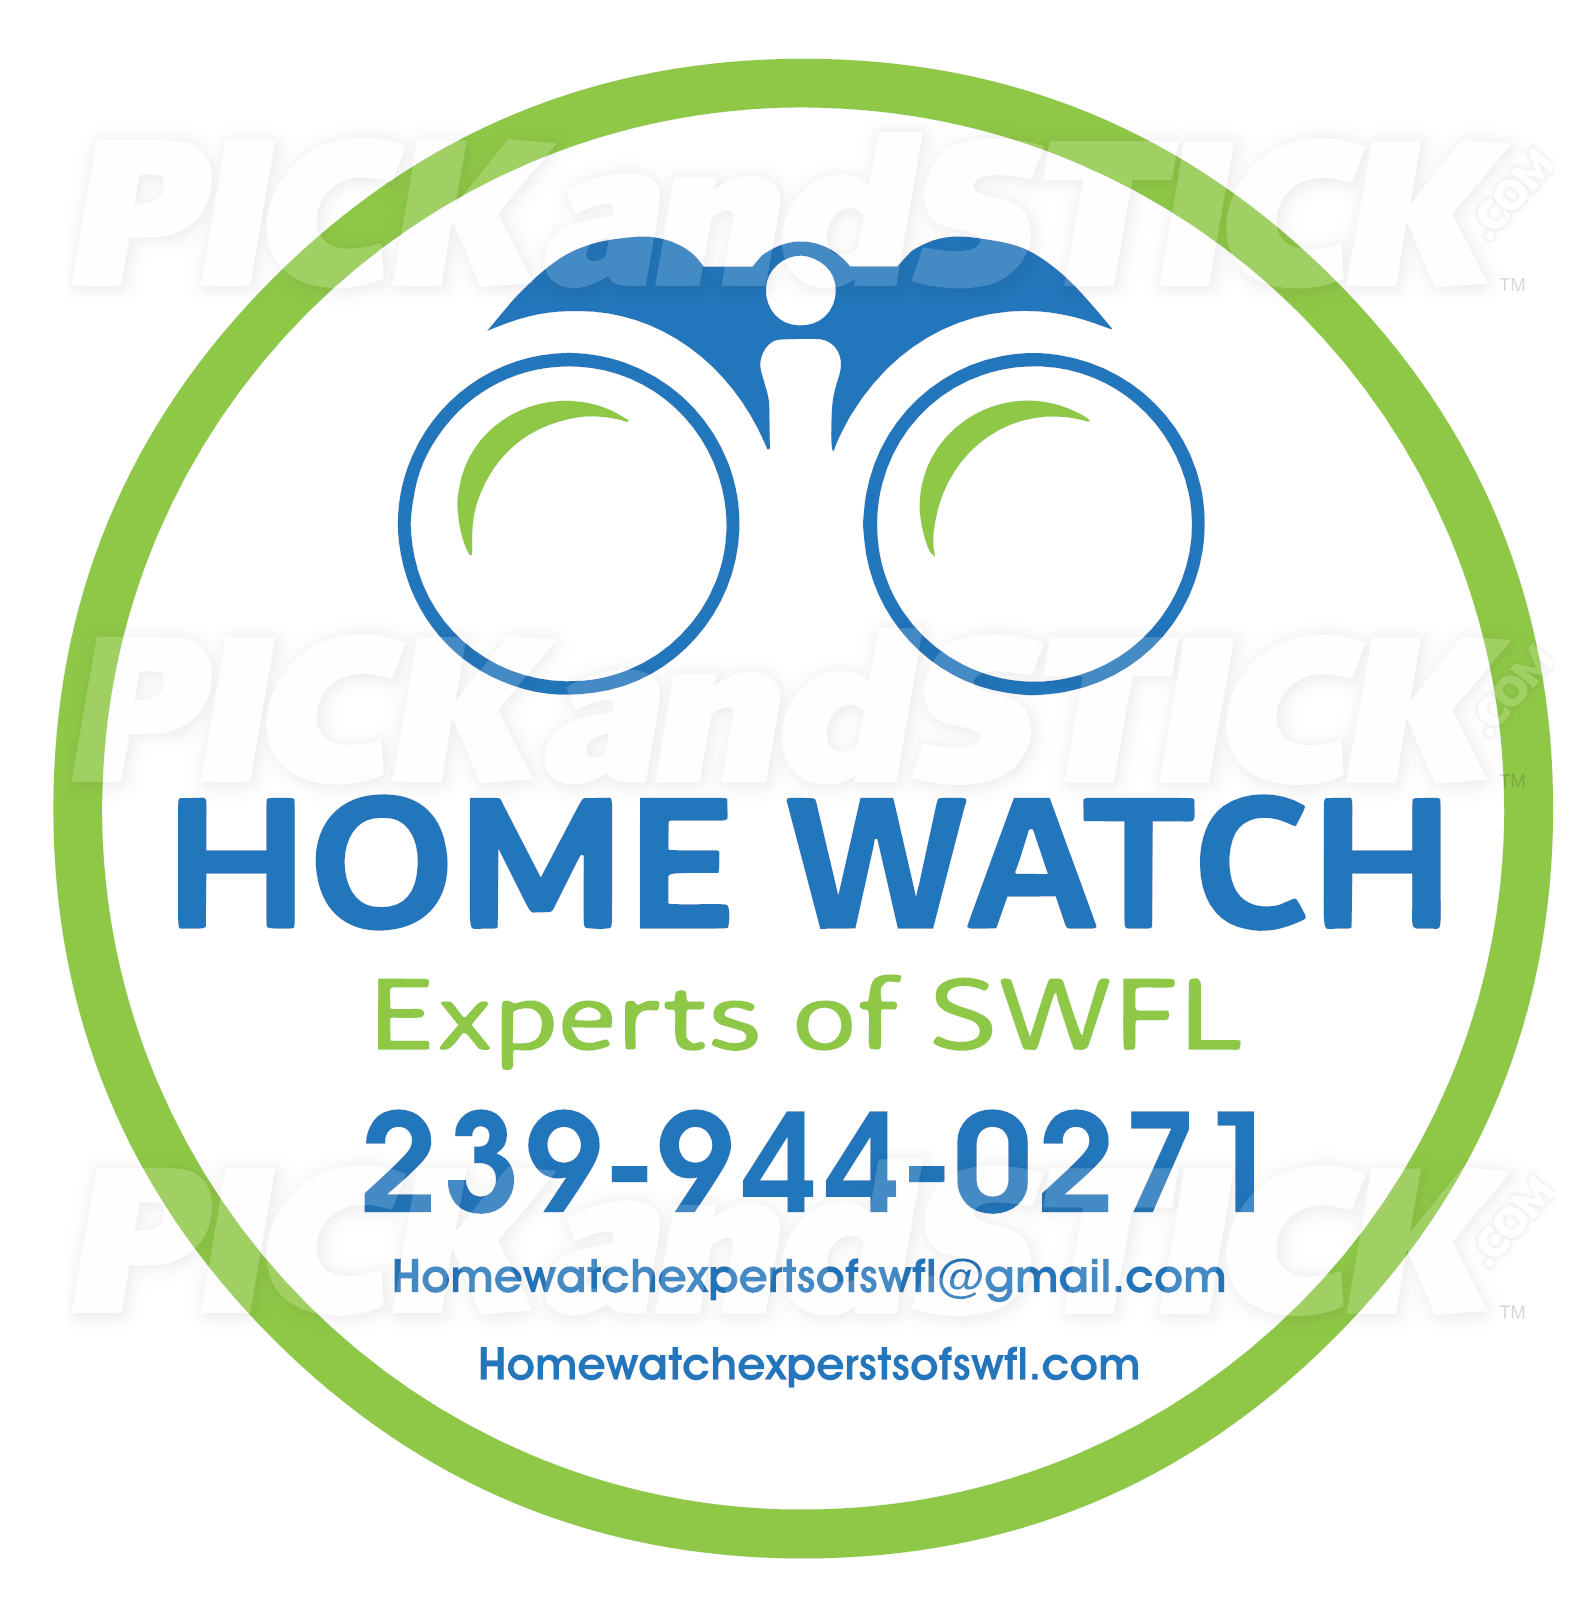 Home Watch of SWFL